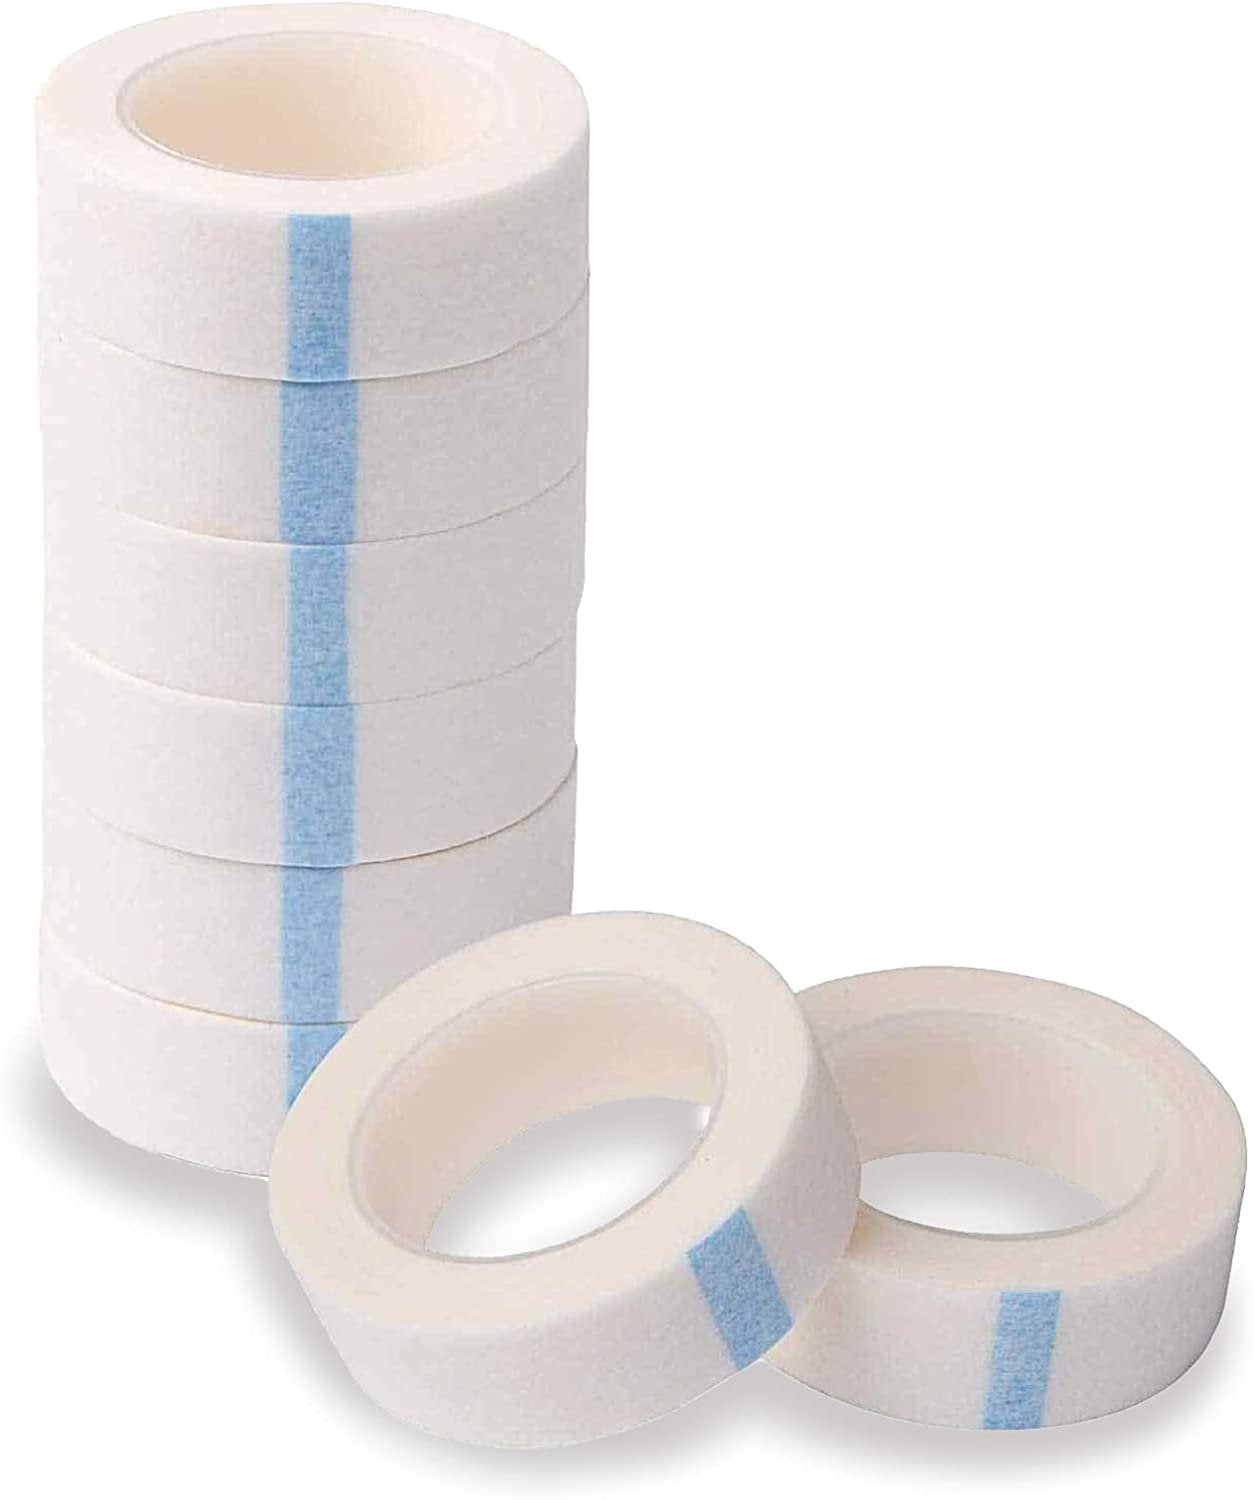 EZGOODZ Transparent Plastic Surgical Tape for Wounds 3 x 10 Yds, Clear Medical  Tape for Wound Care Pack of 4 Rolls, Hypoallergenic First Aid Tape Roll,  Non-Sterile Medical Adhesive Tape for Skin 